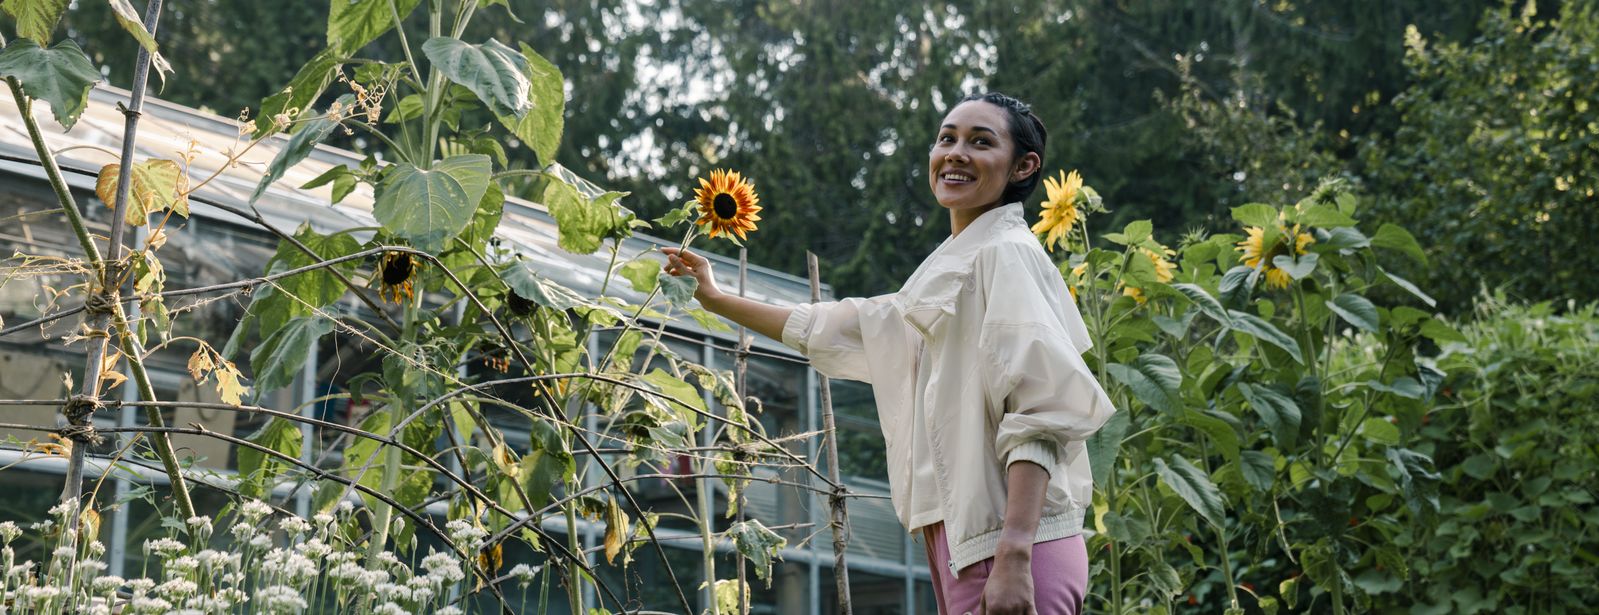 Image of woman picking sunflower and smiling.